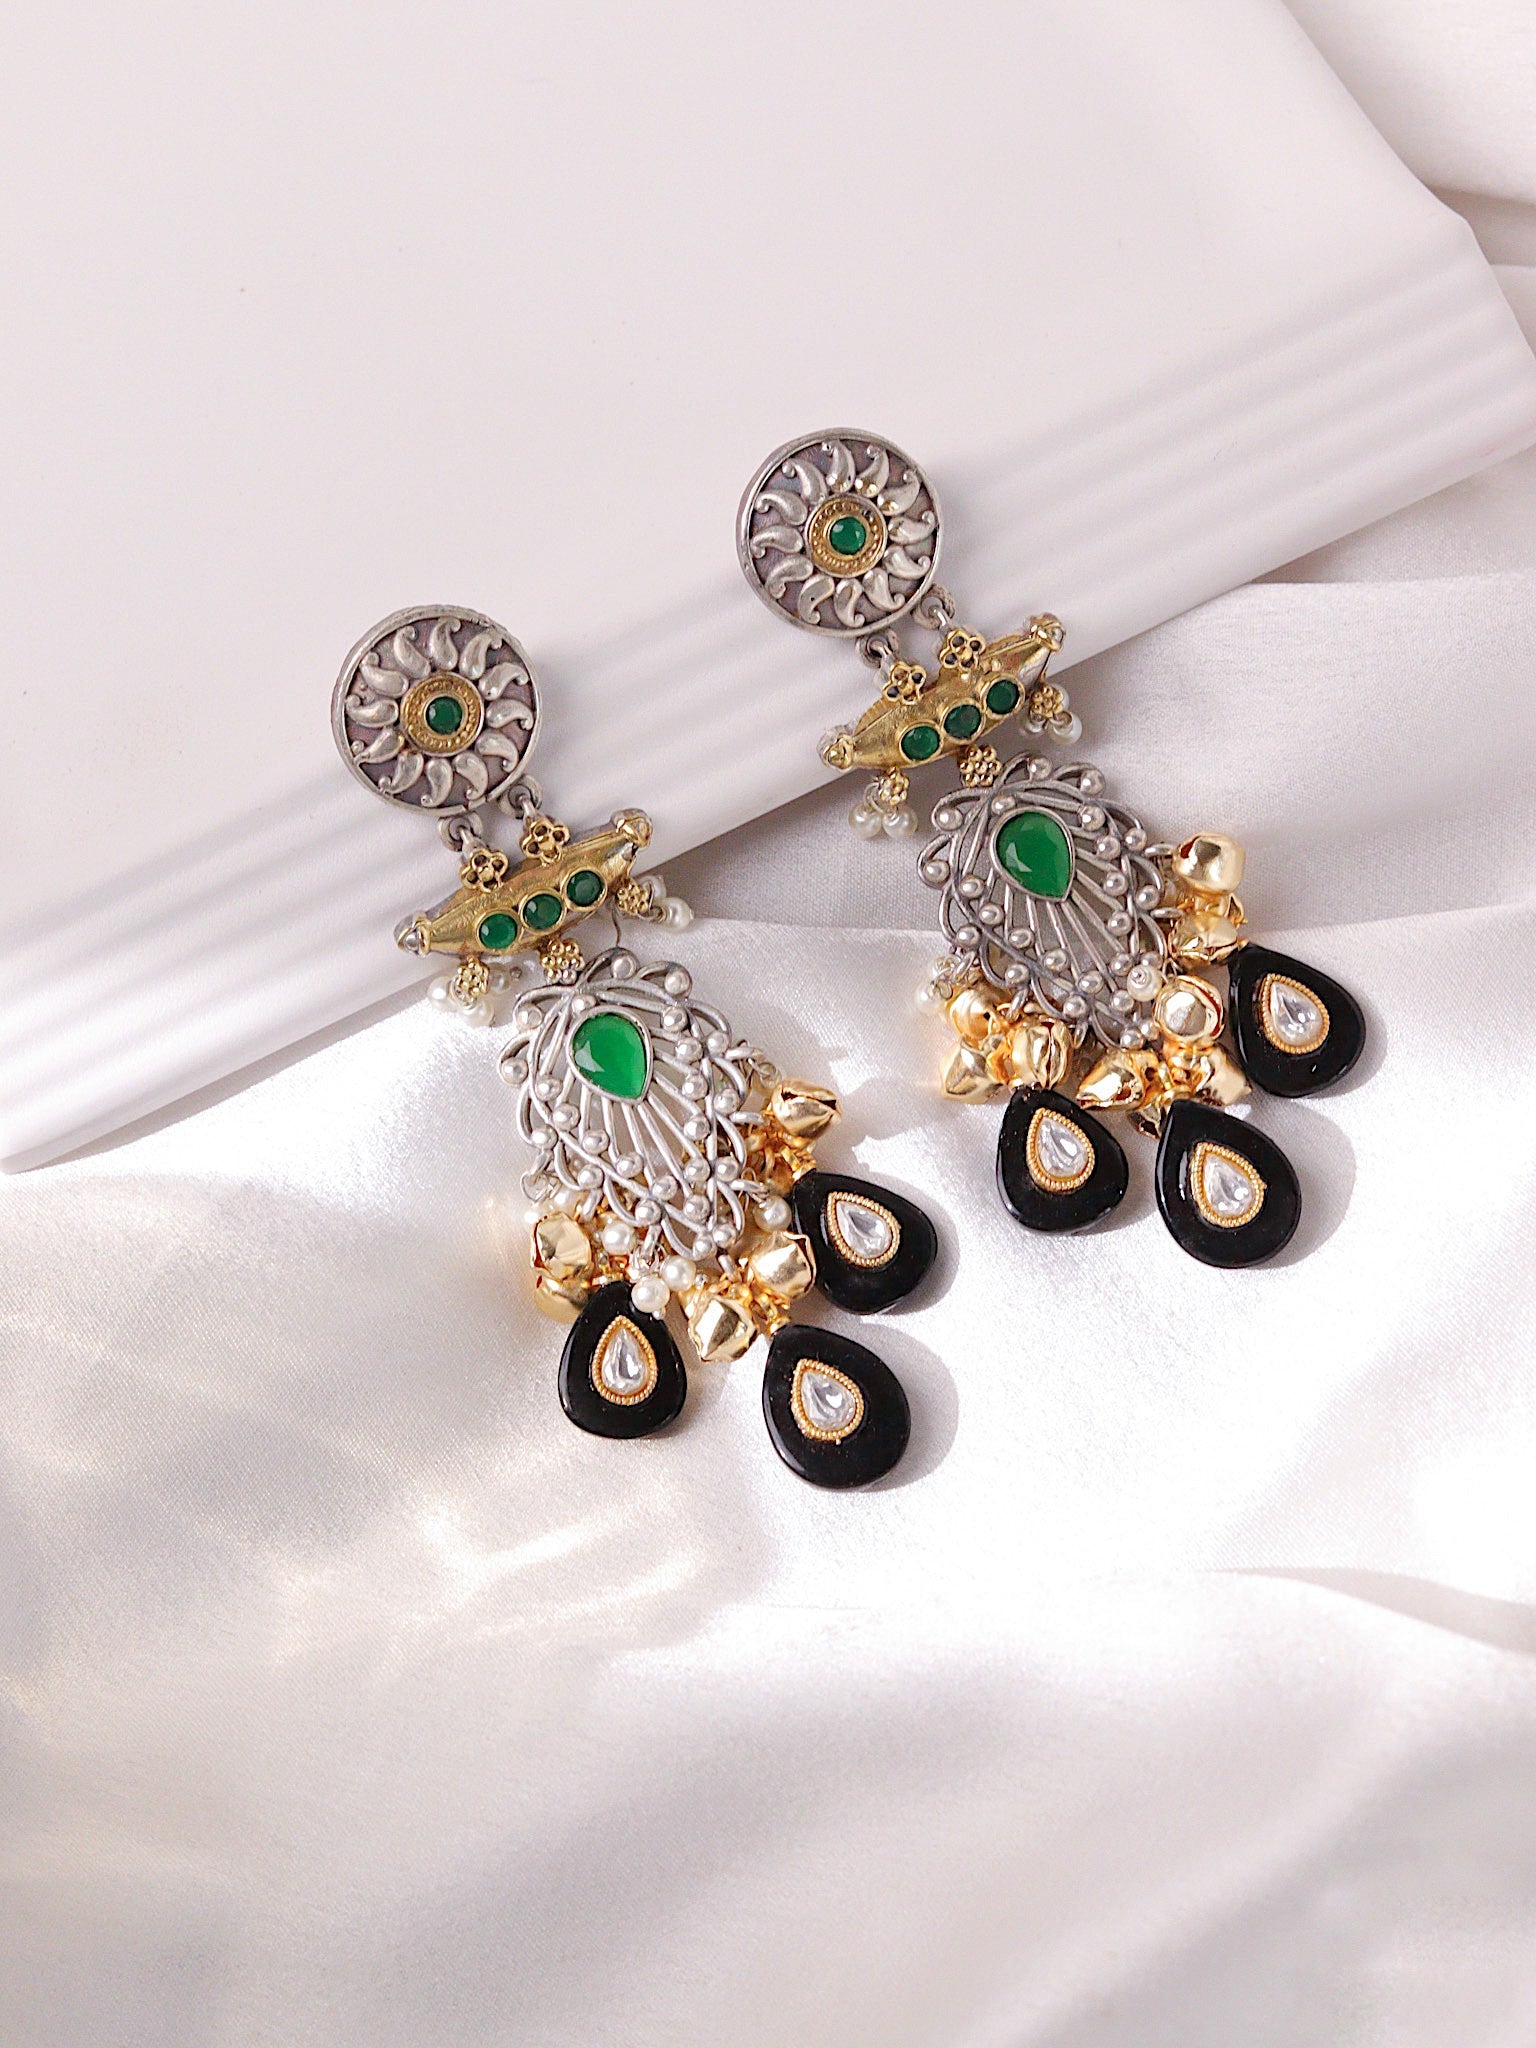  The Gypsy Graceful Green and Onyx Earrings